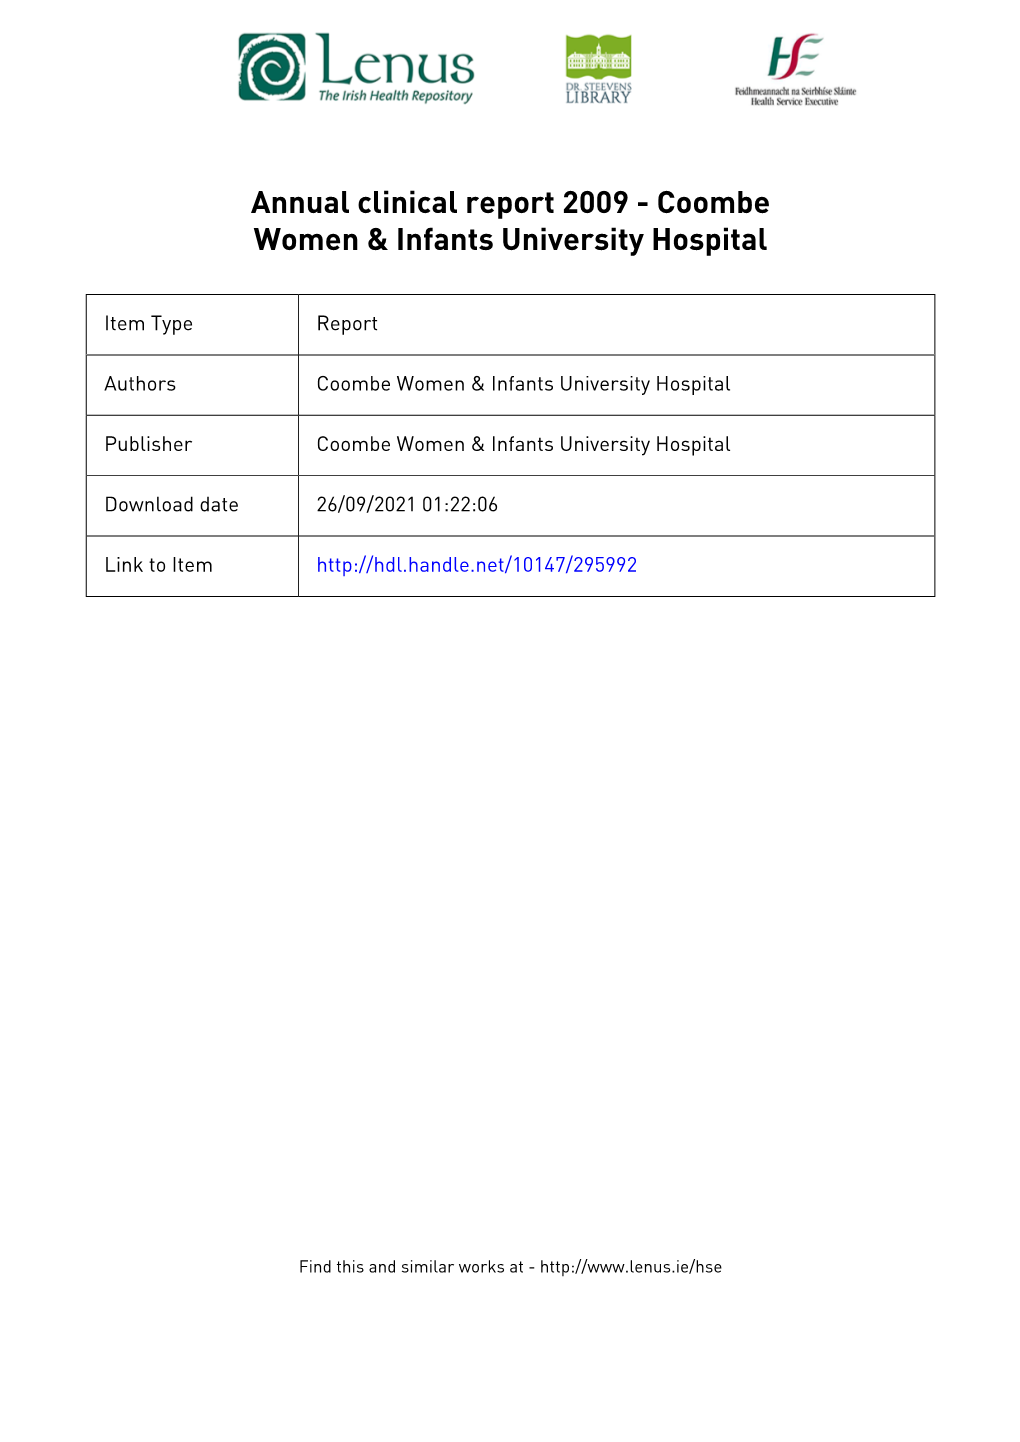 Annual Clinical Report 2009 Coombe Women & Infants University Hospital